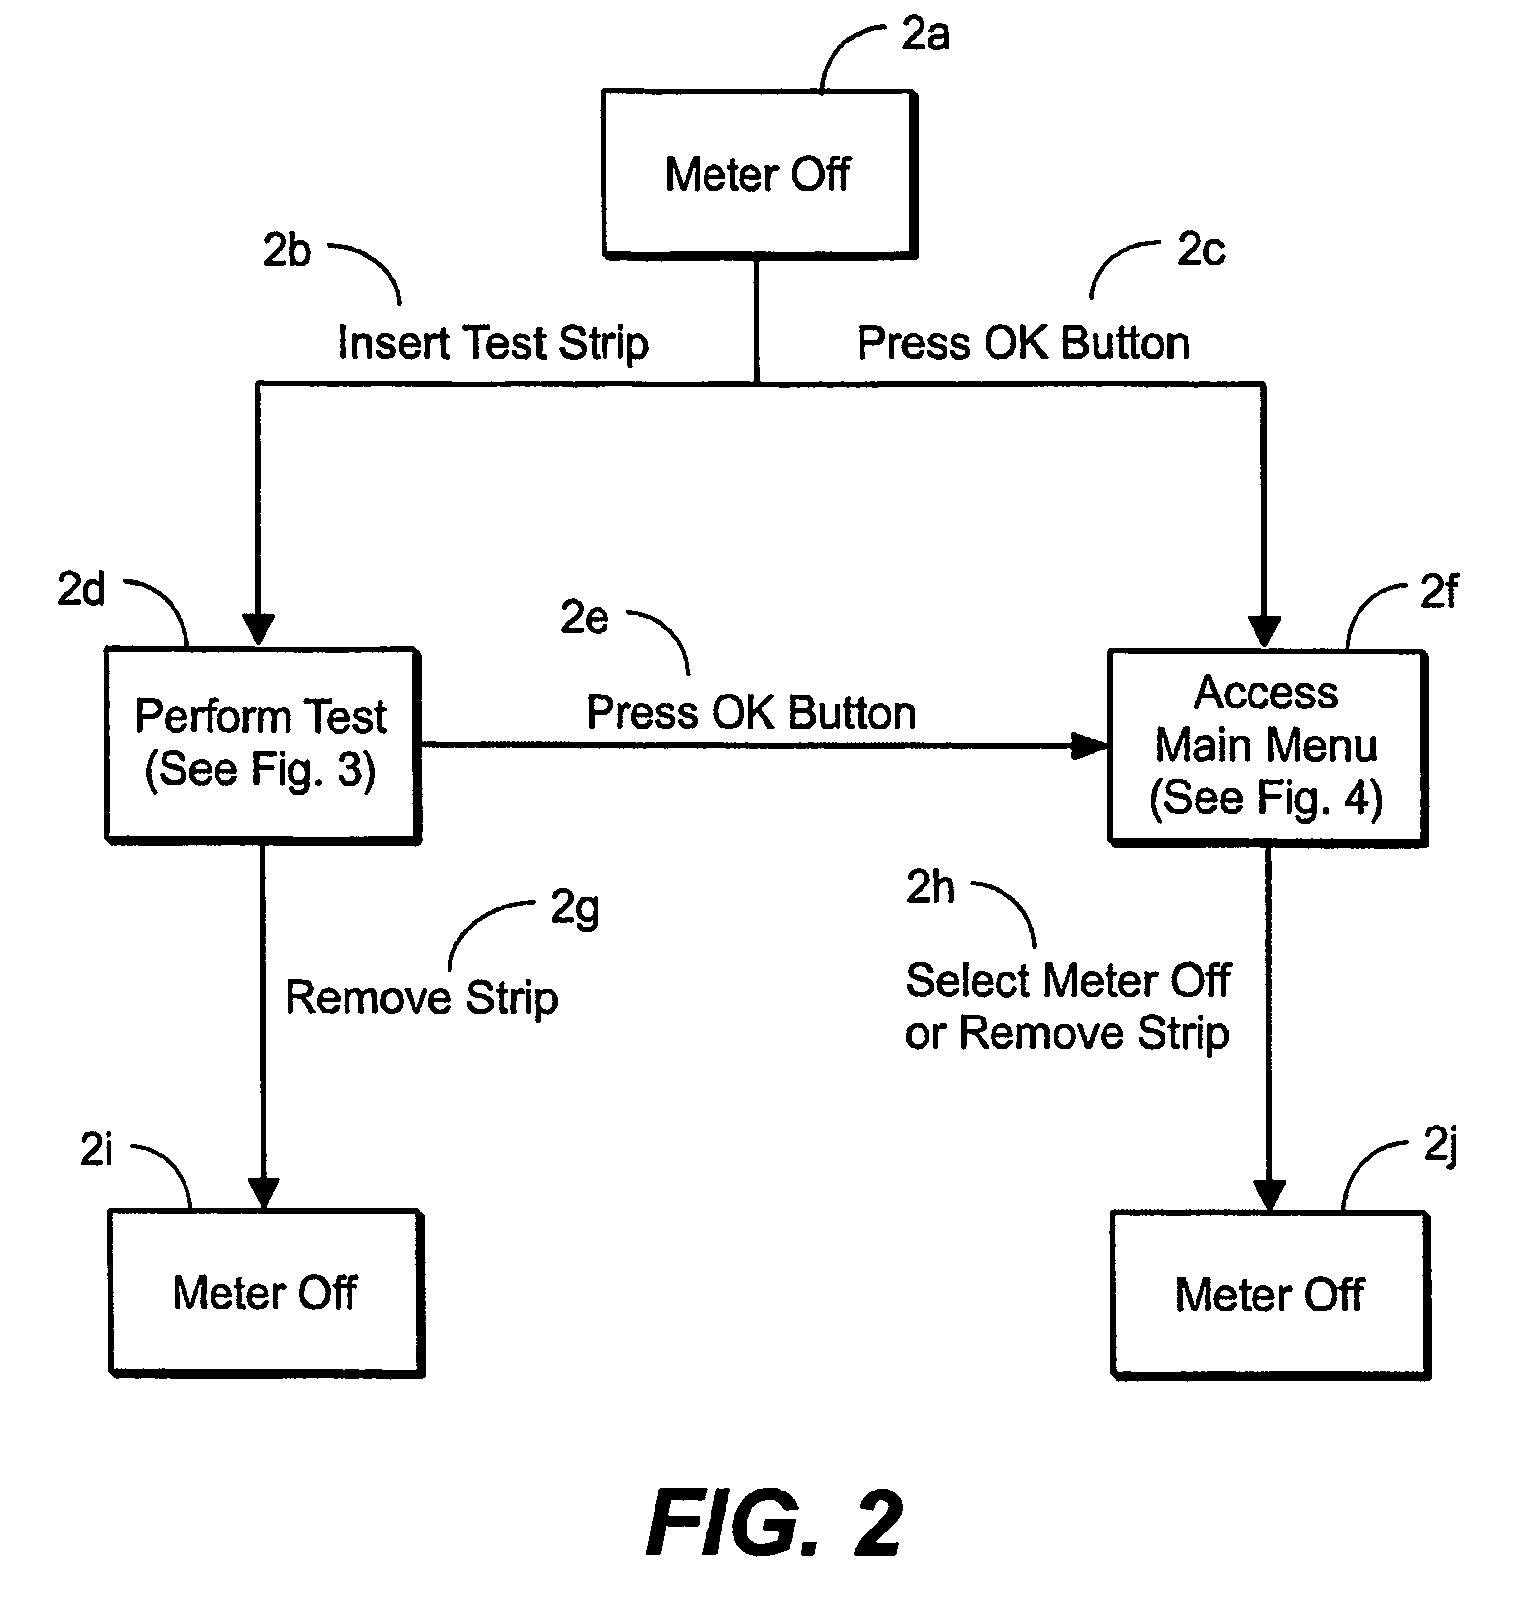 Method of inputting data into analyte testing device